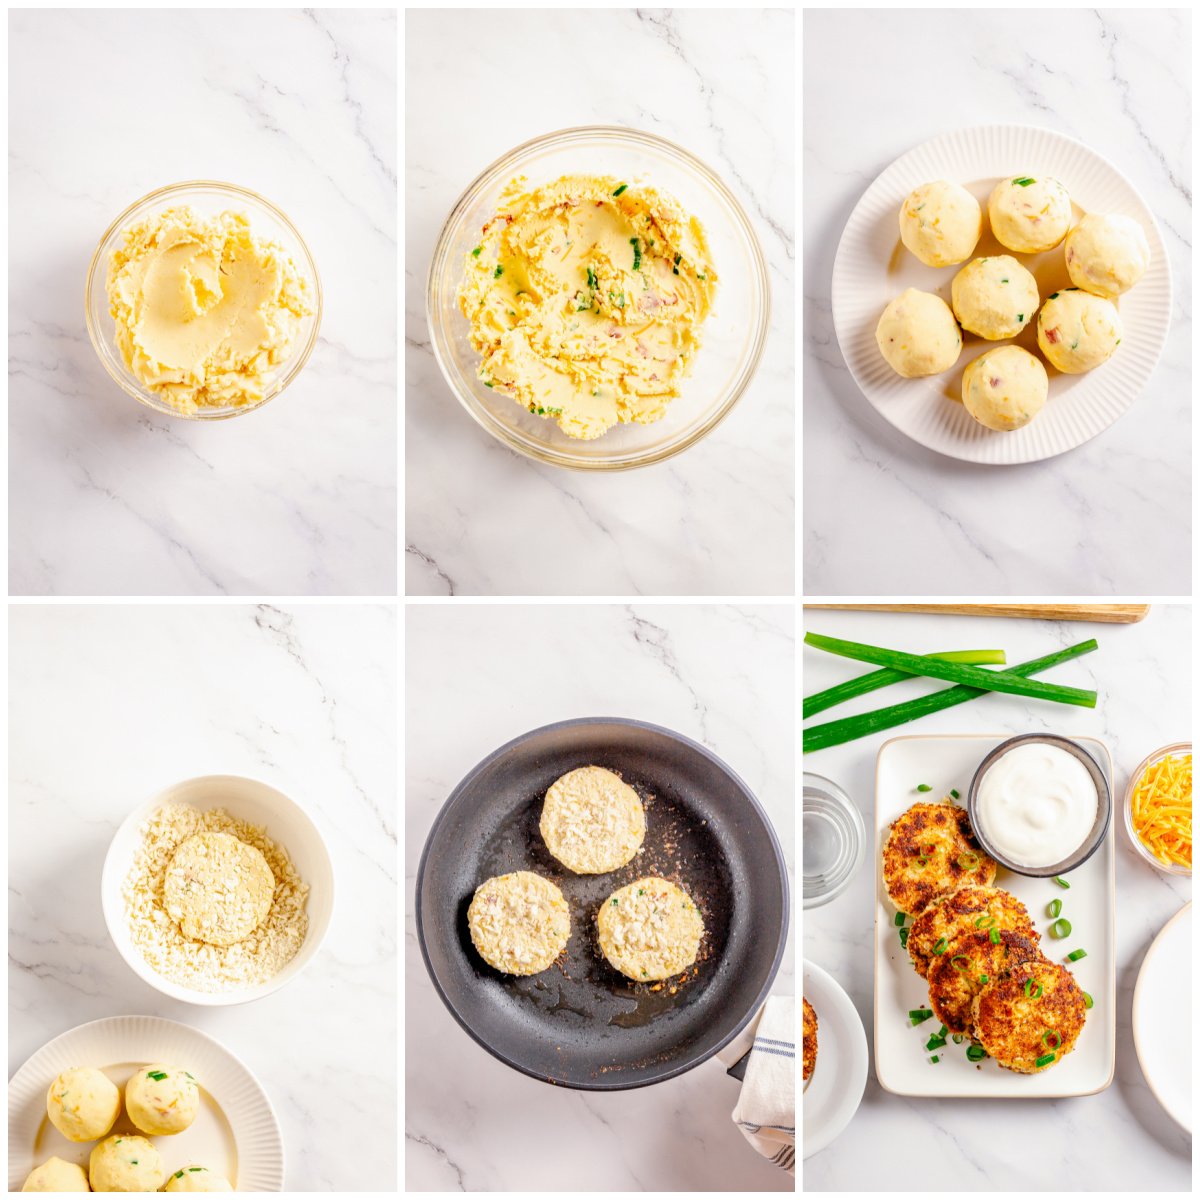 Step by step photos on how to make Loaded Mashed Potato Cakes.